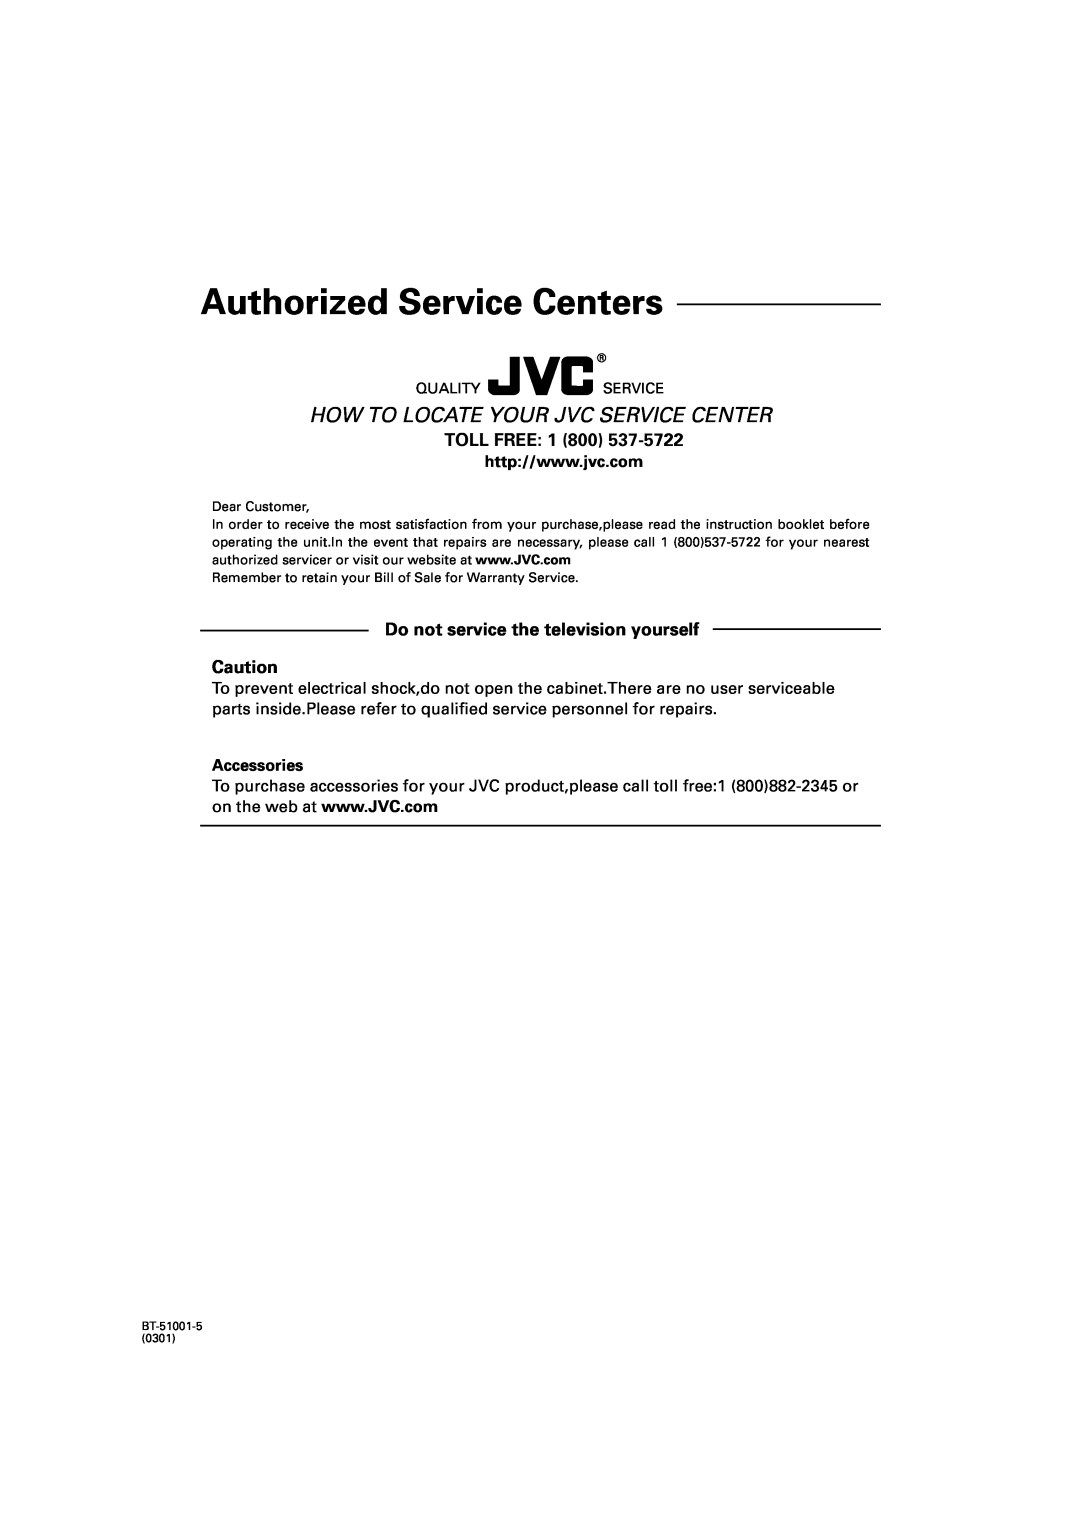 JVC FS-H10 manual Toll Free, Do not service the television yourself, Authorized Service Centers, Accessories 